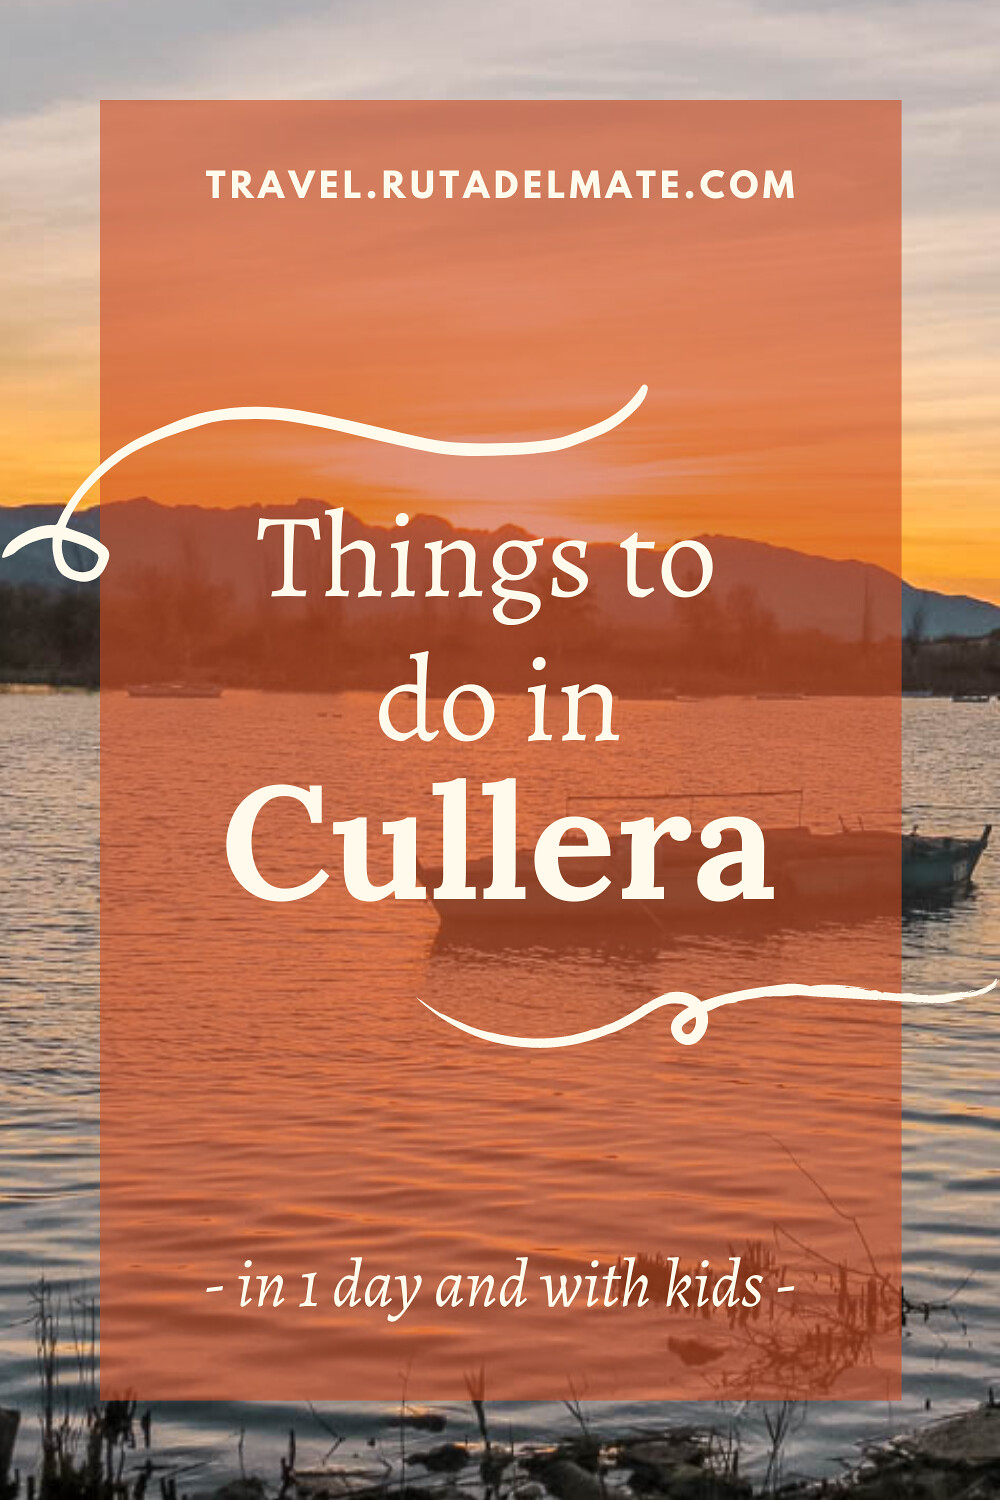 Things to do in Cullera  in 1 day besides the beach